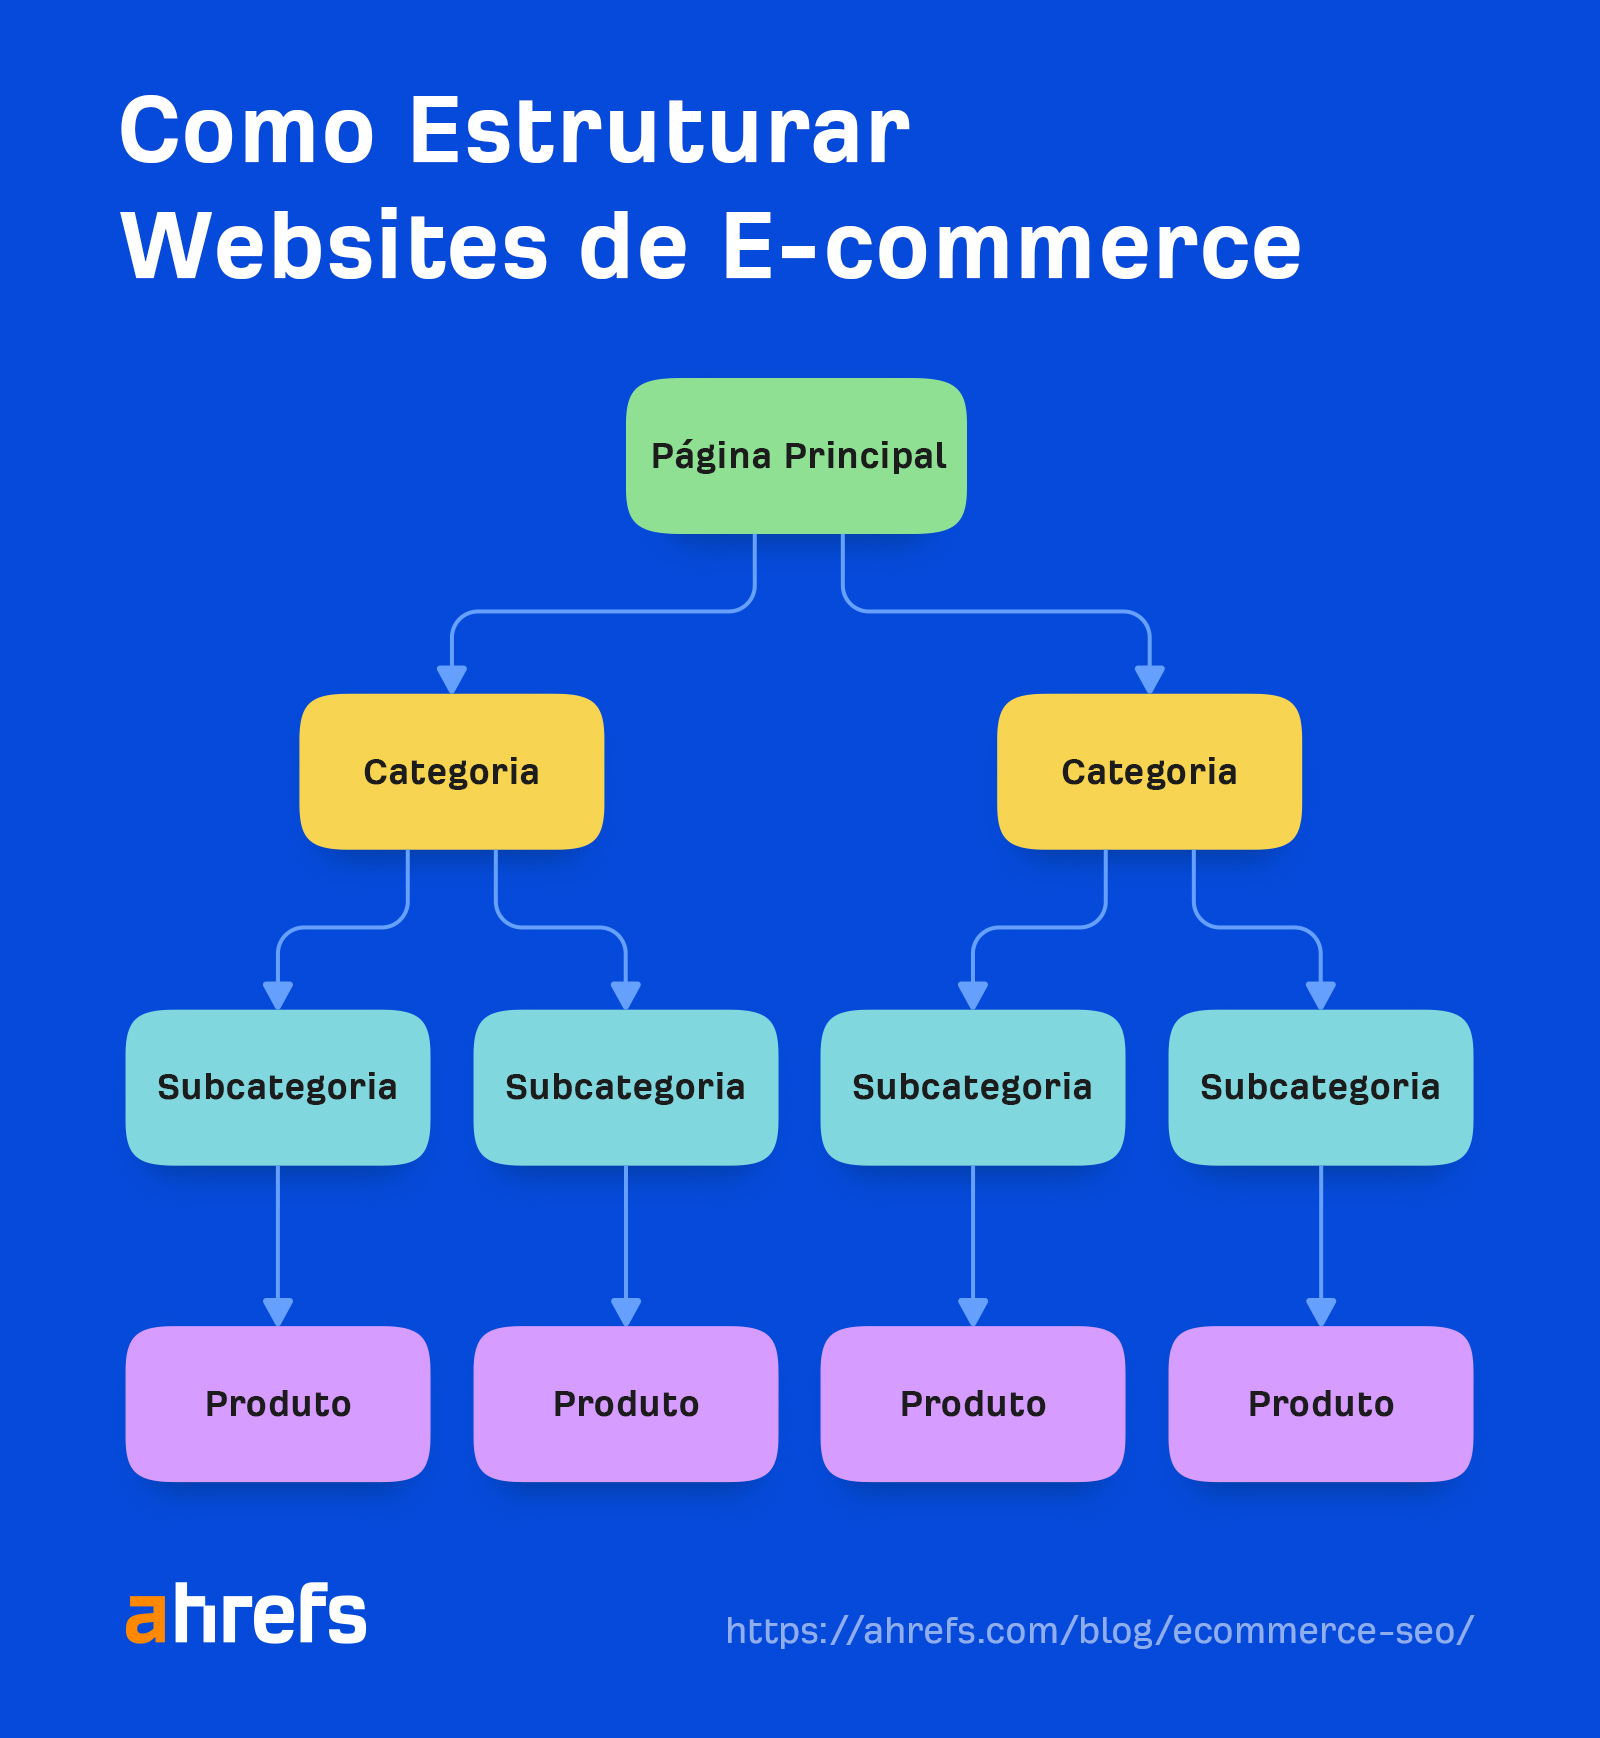 How to structure e-commerce sites
